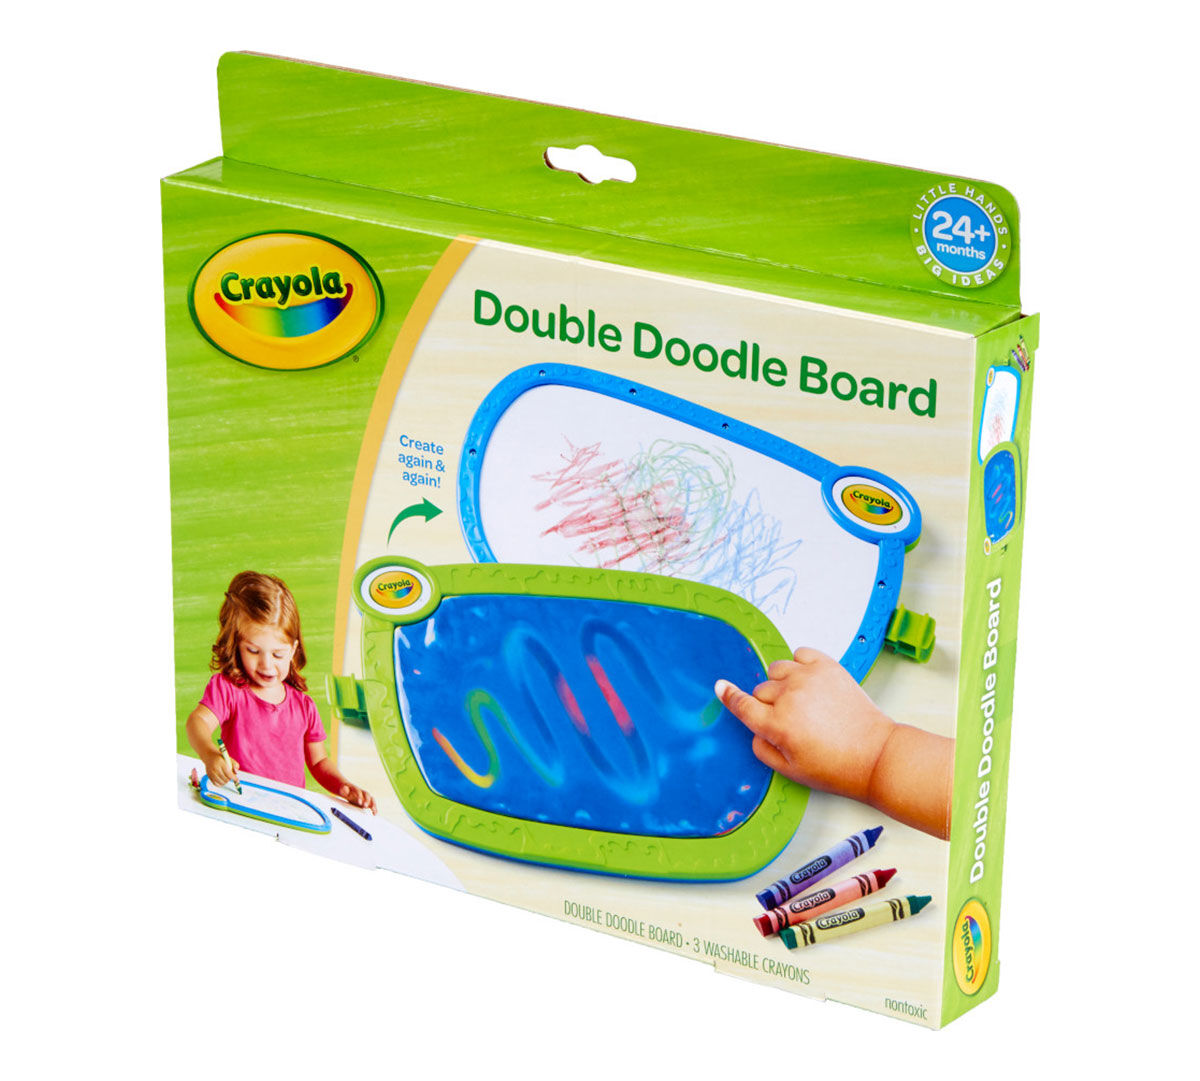 Crayola Crayola My First Double Doodle Colouring Board 81-1347 Brand NEW & Boxed 